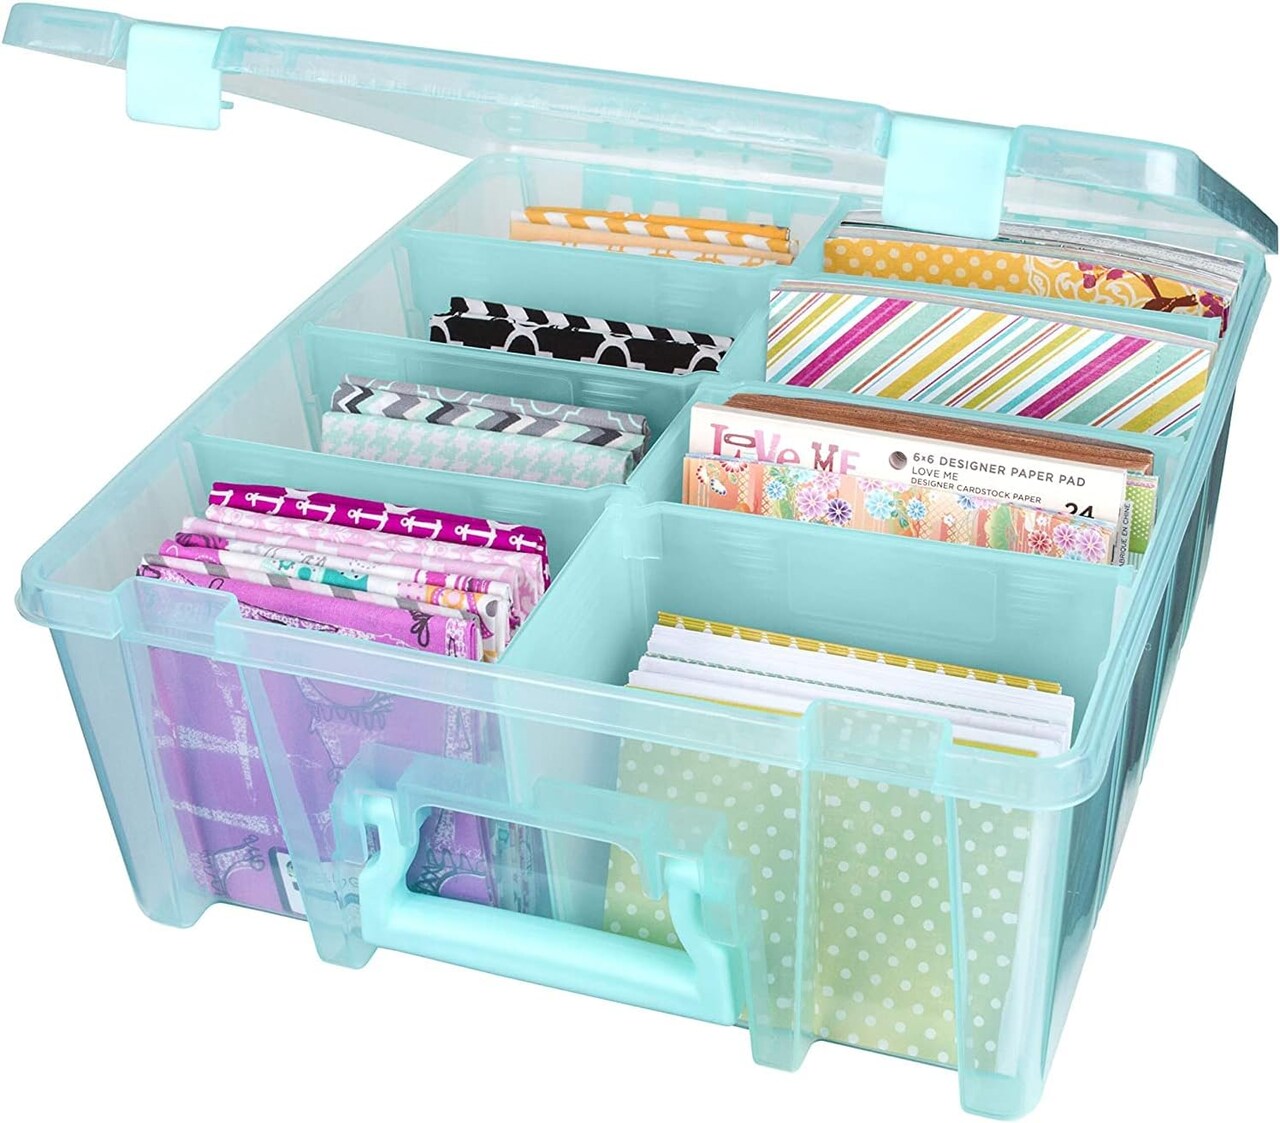 Portable Arts and Crafts Storage with Handle